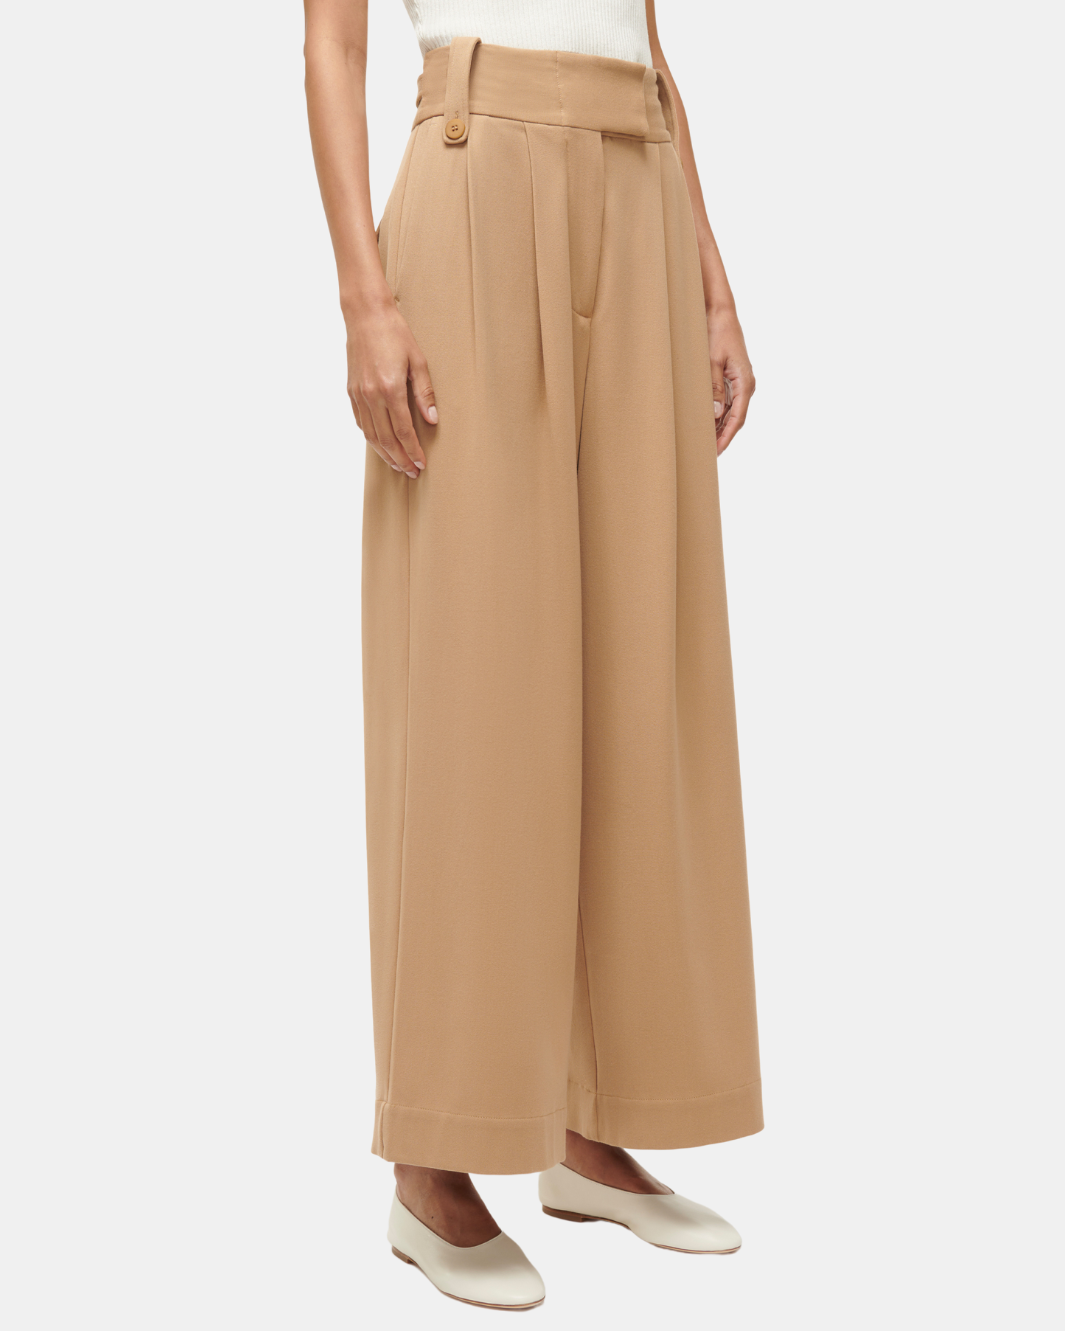 RUTH PANT IN CAMEL - Romi Boutique